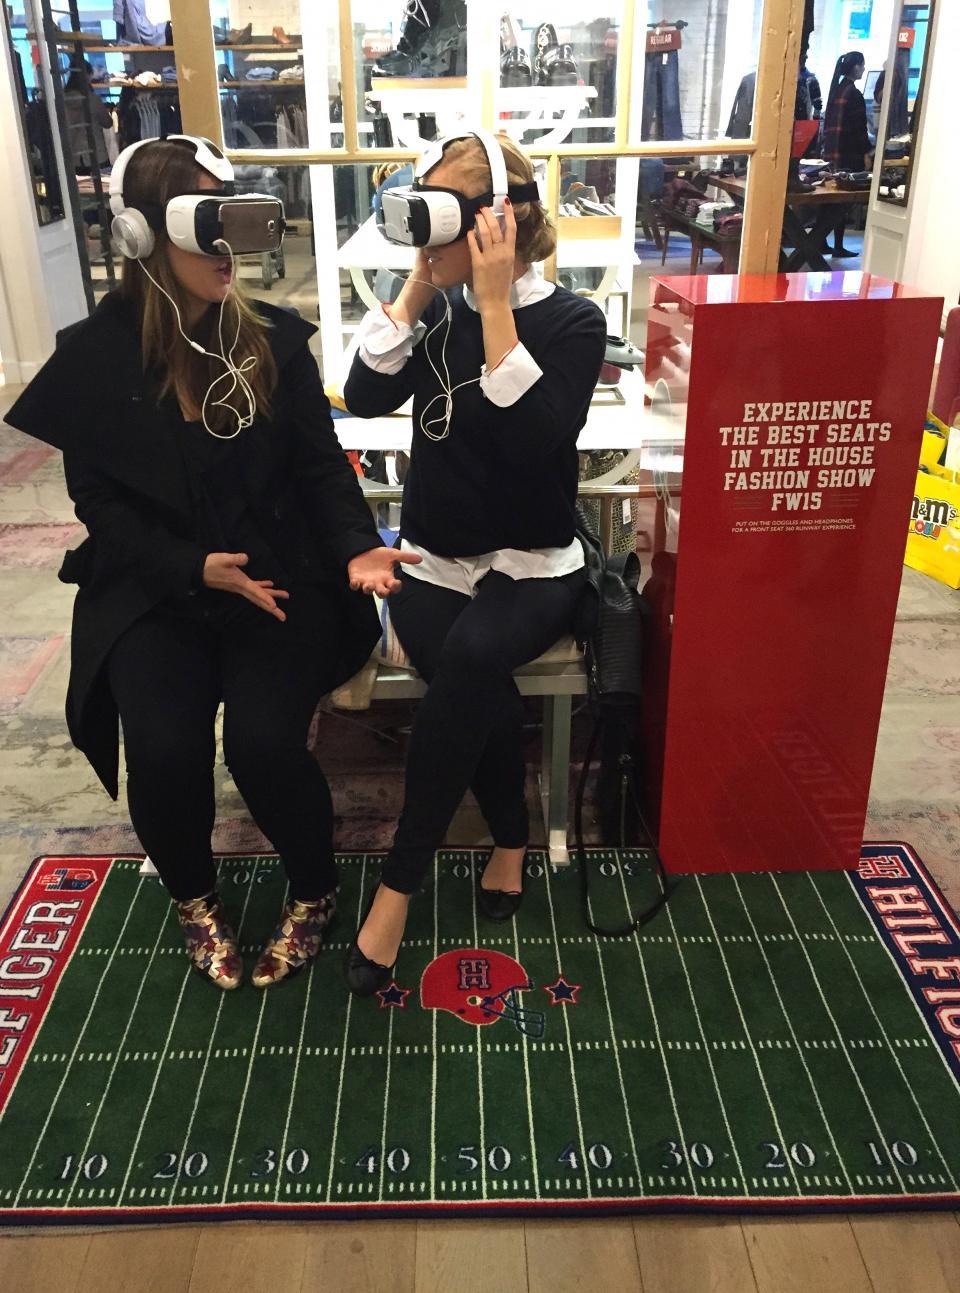 Tommy Hilfiger introduced a virtual reality shopping experience at selected stores to watch Fall 2015 Hilfiger Collection runway show Tommy Hilfiger introduced